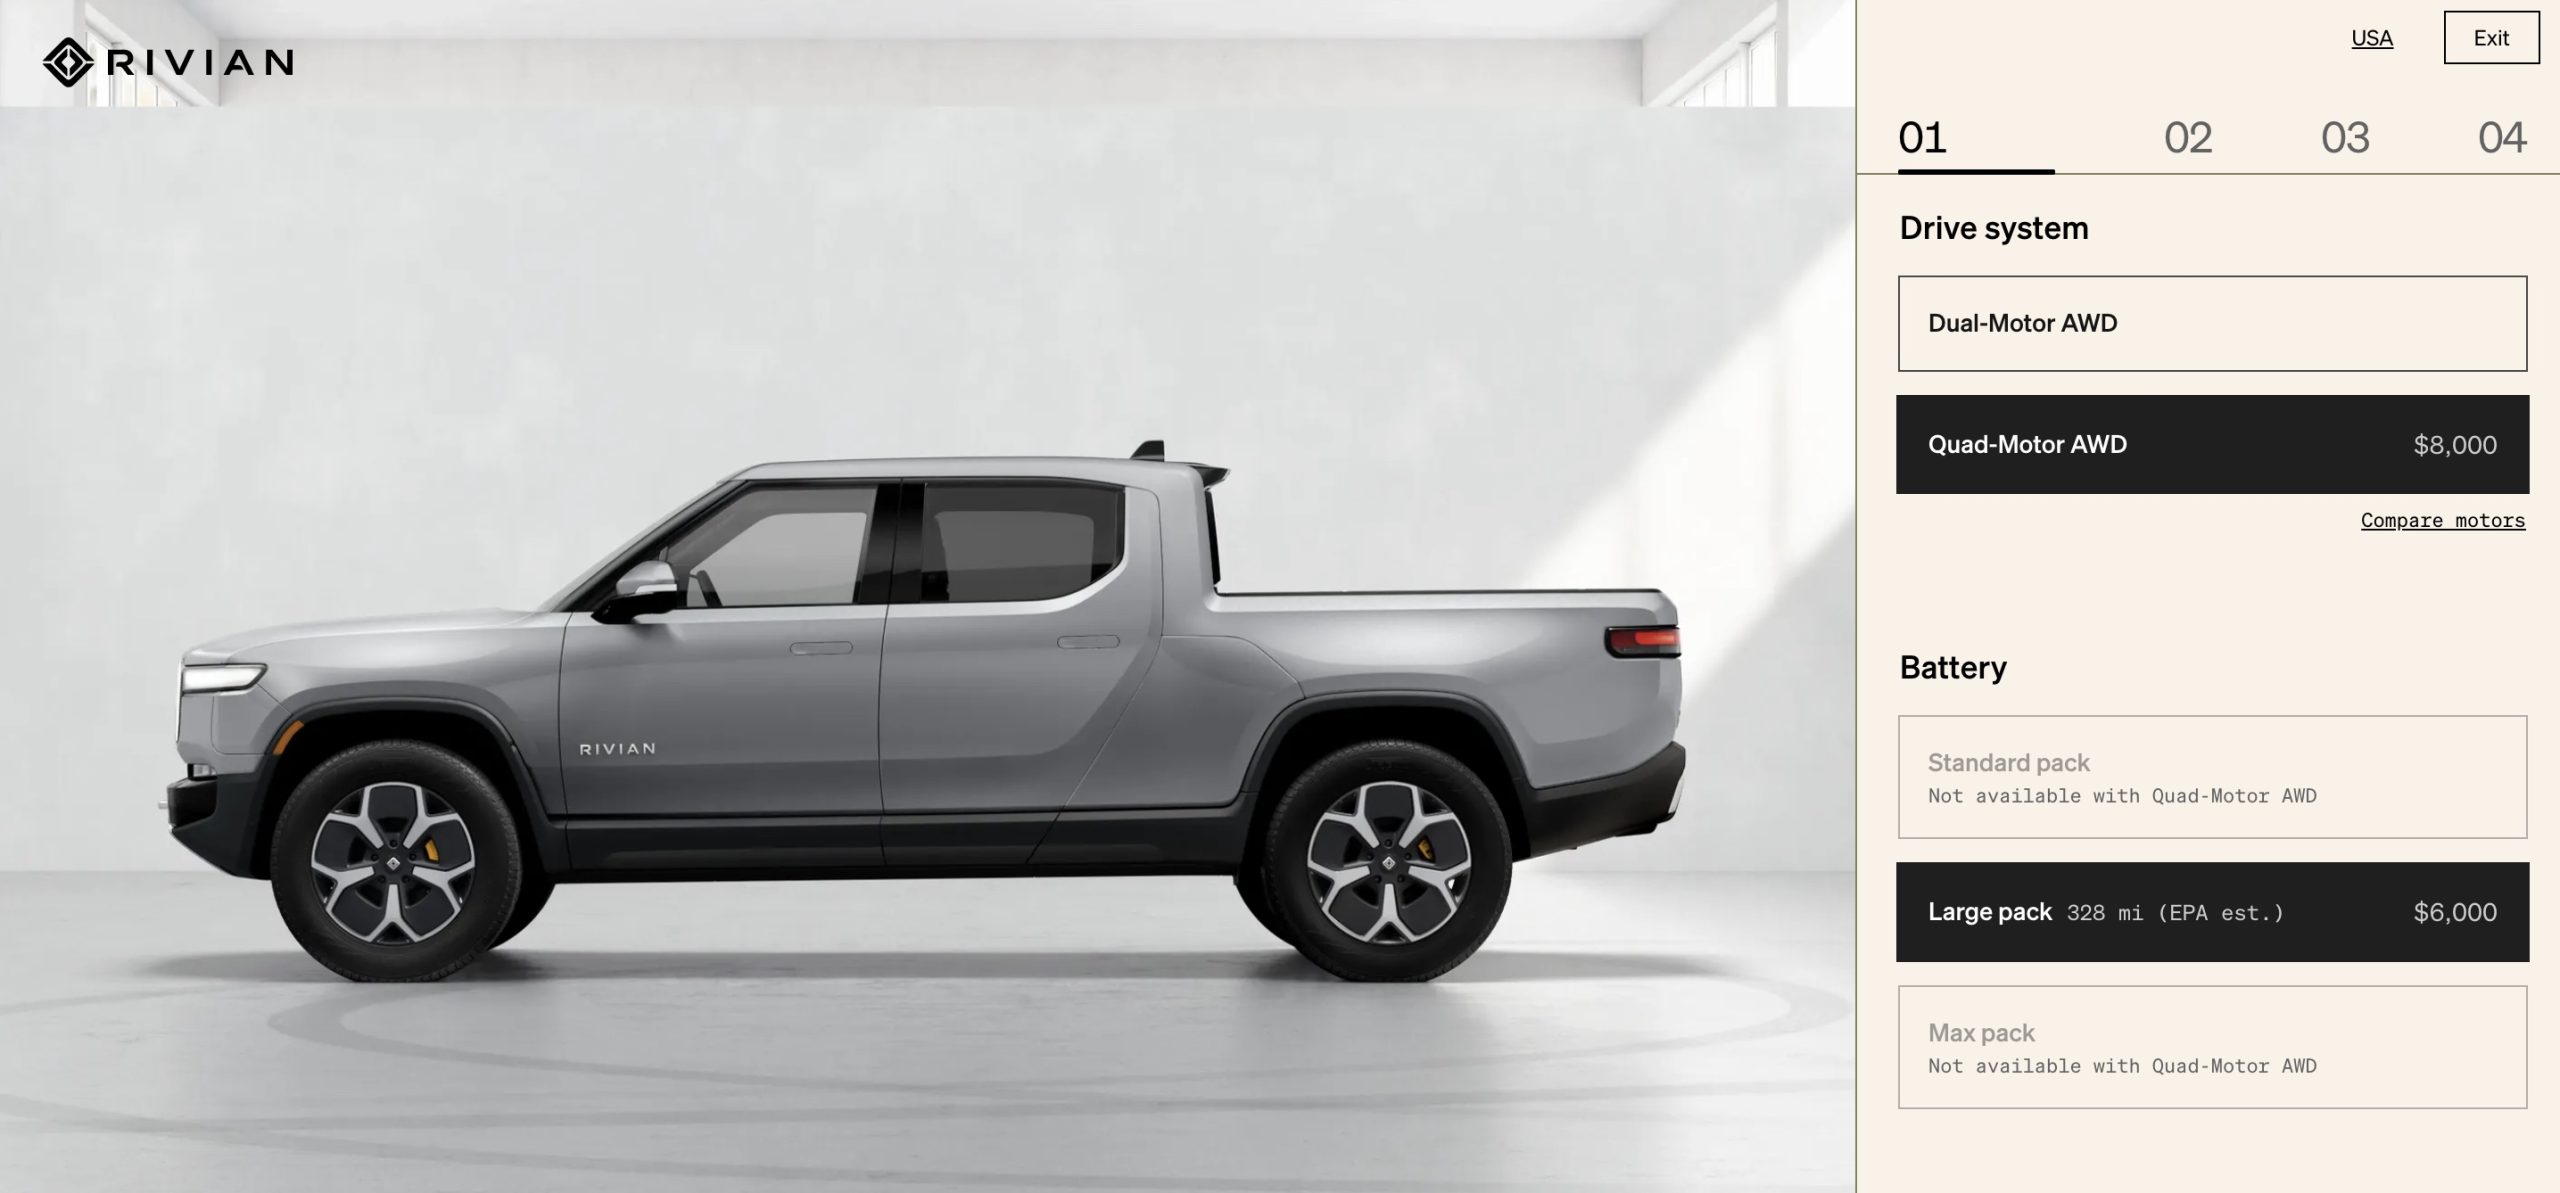 Rivian R1T Max Pack delivery window moves to Q2 2023